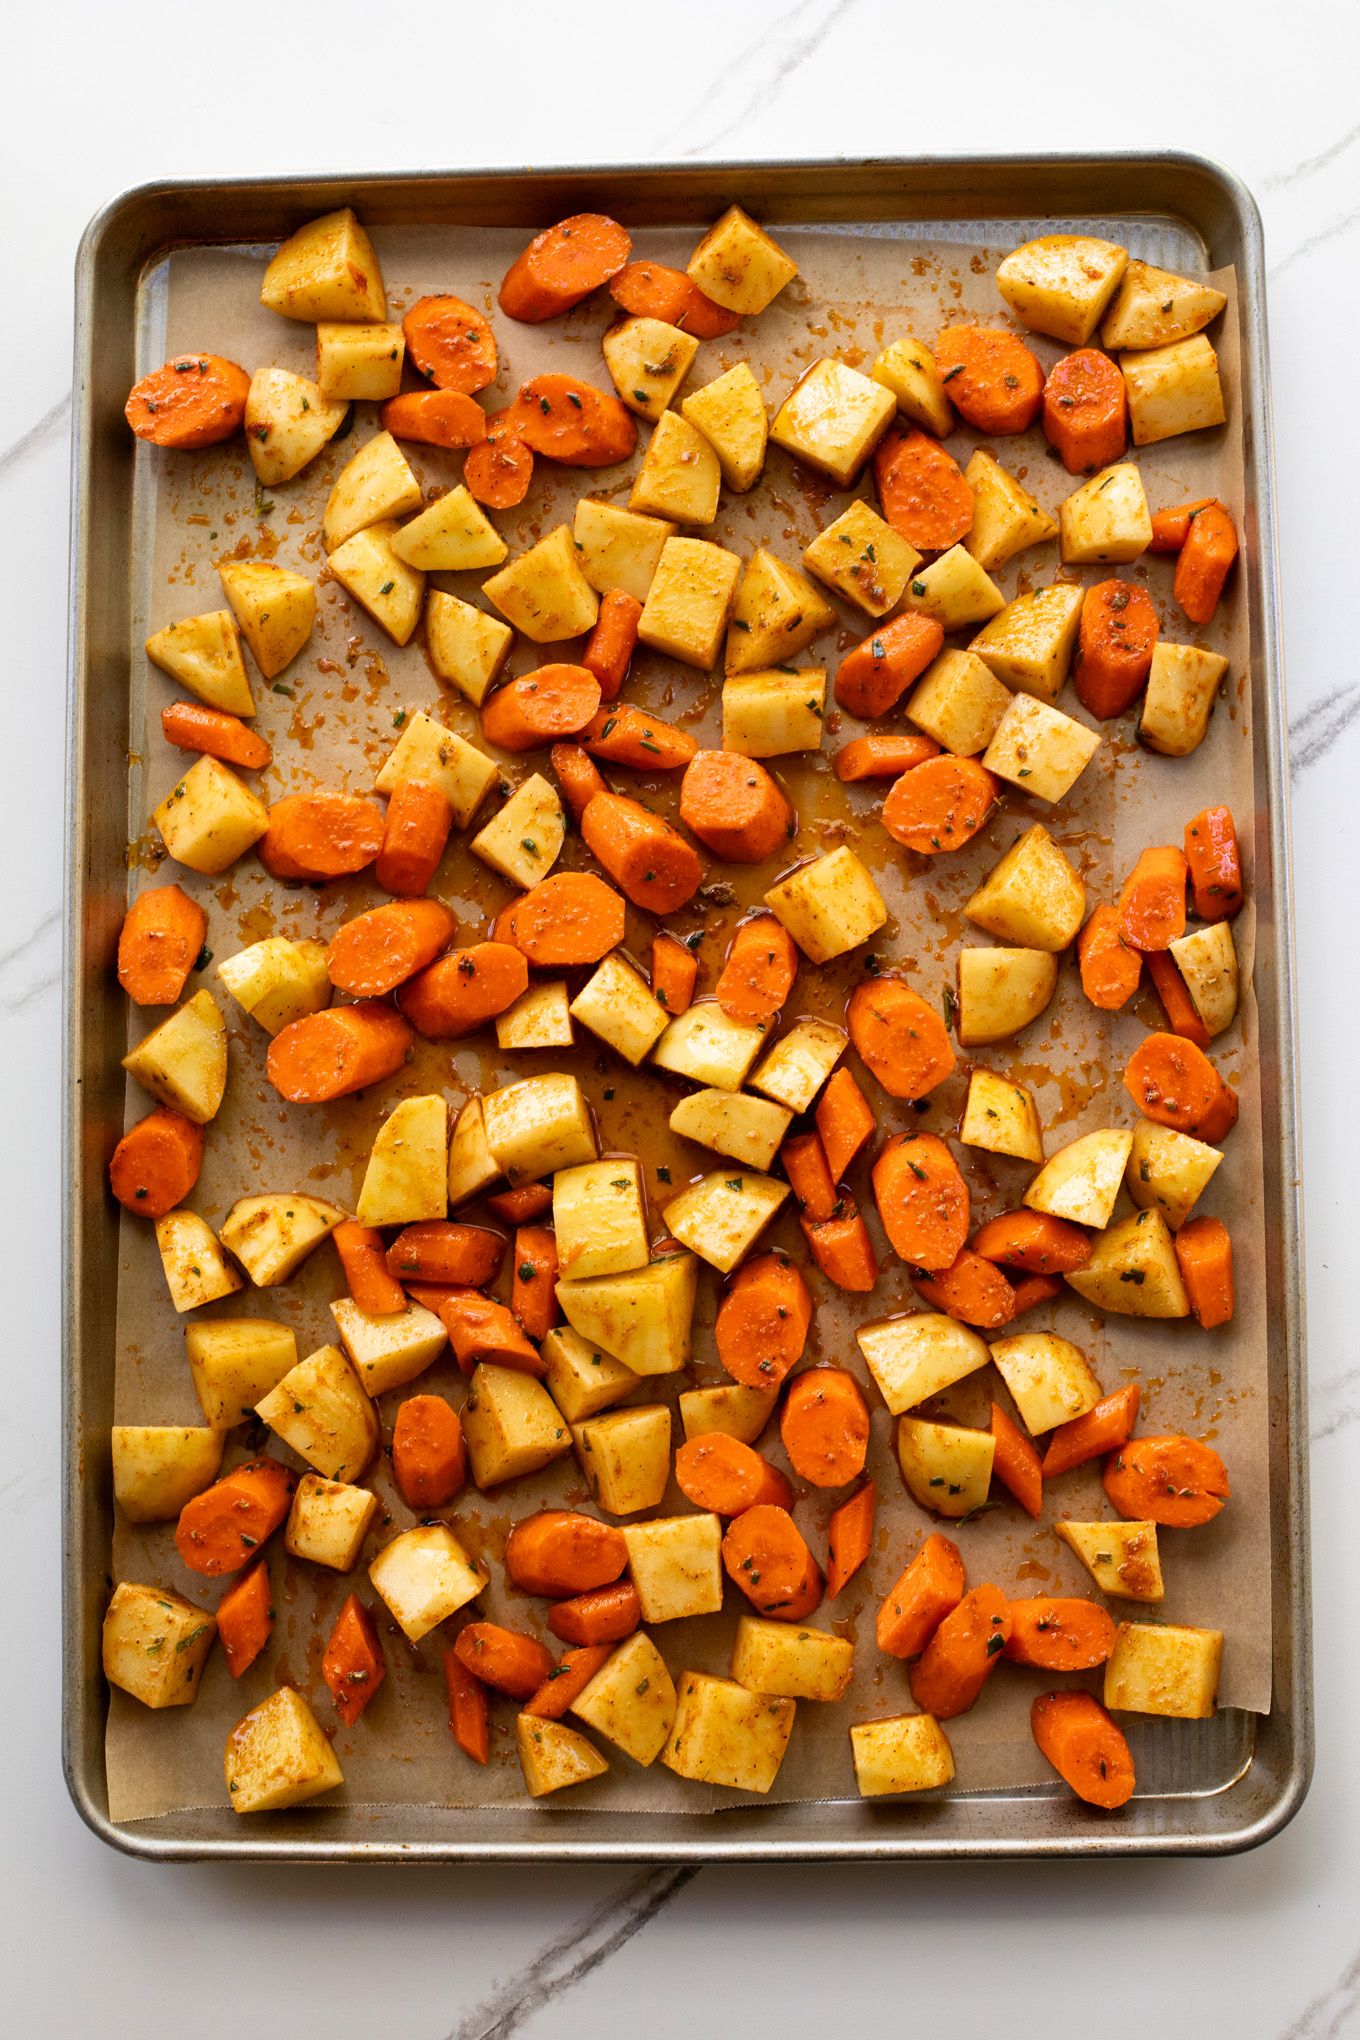 cut up potatoes and carrots on a baking sheet.